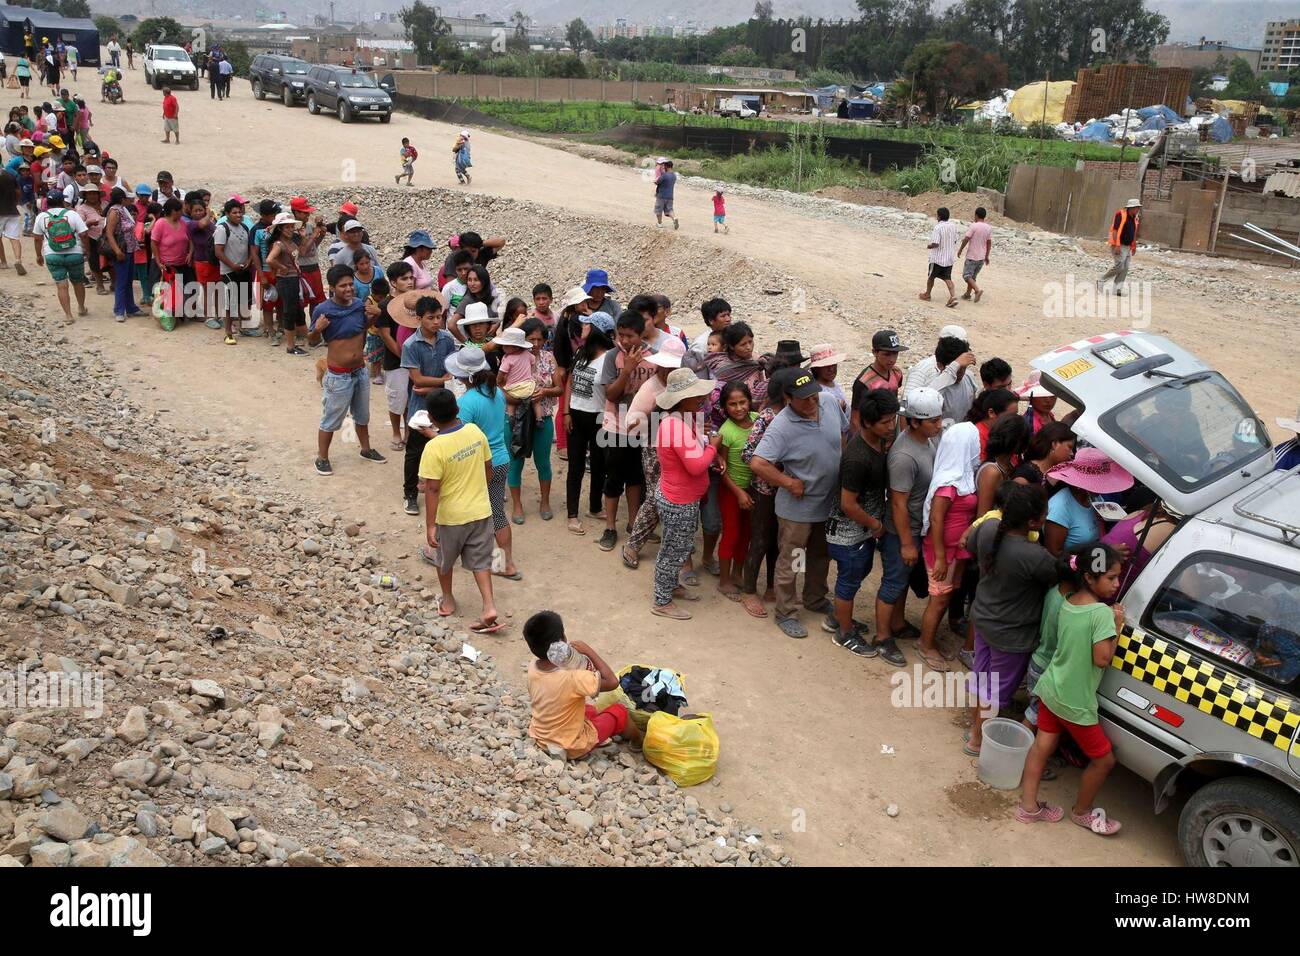 Lima, Peru. 18th Mar, 2017. People line up for relief goods in Lima, Peru, on March 18, 2017. Peru is facing a critical situation due to the coastal El Nino phenomenon which has been battering the country with endless rainfall for weeks, causing severe social and economic consequences. Credit: Vidal Tarqui/ANDINA/Xinhua/Alamy Live News Stock Photo